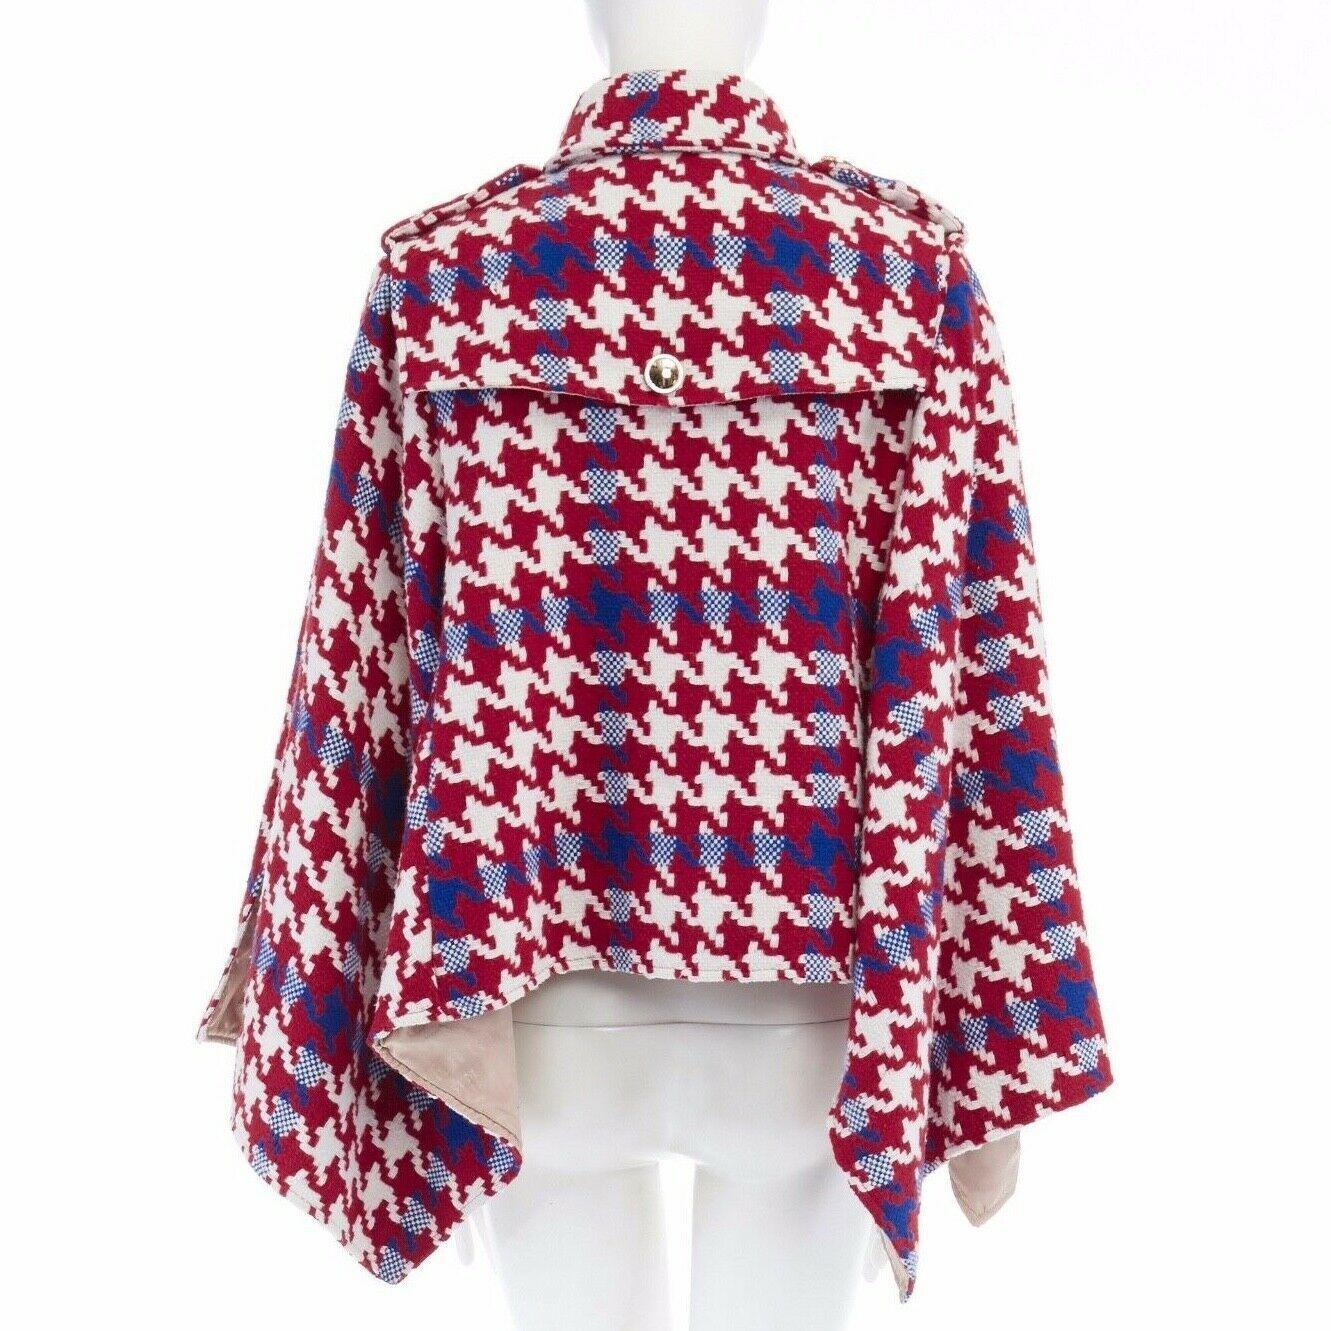 BURBERRY PRORSUM red blue houndstooth wool double breasted poncho cape jacket M

BURBERRY PRORSUM
Wool, polyester . Red, blue and white oversized houndstooth wool knitted upper . Double breasted front closure .Mirrored gold button front . Spread